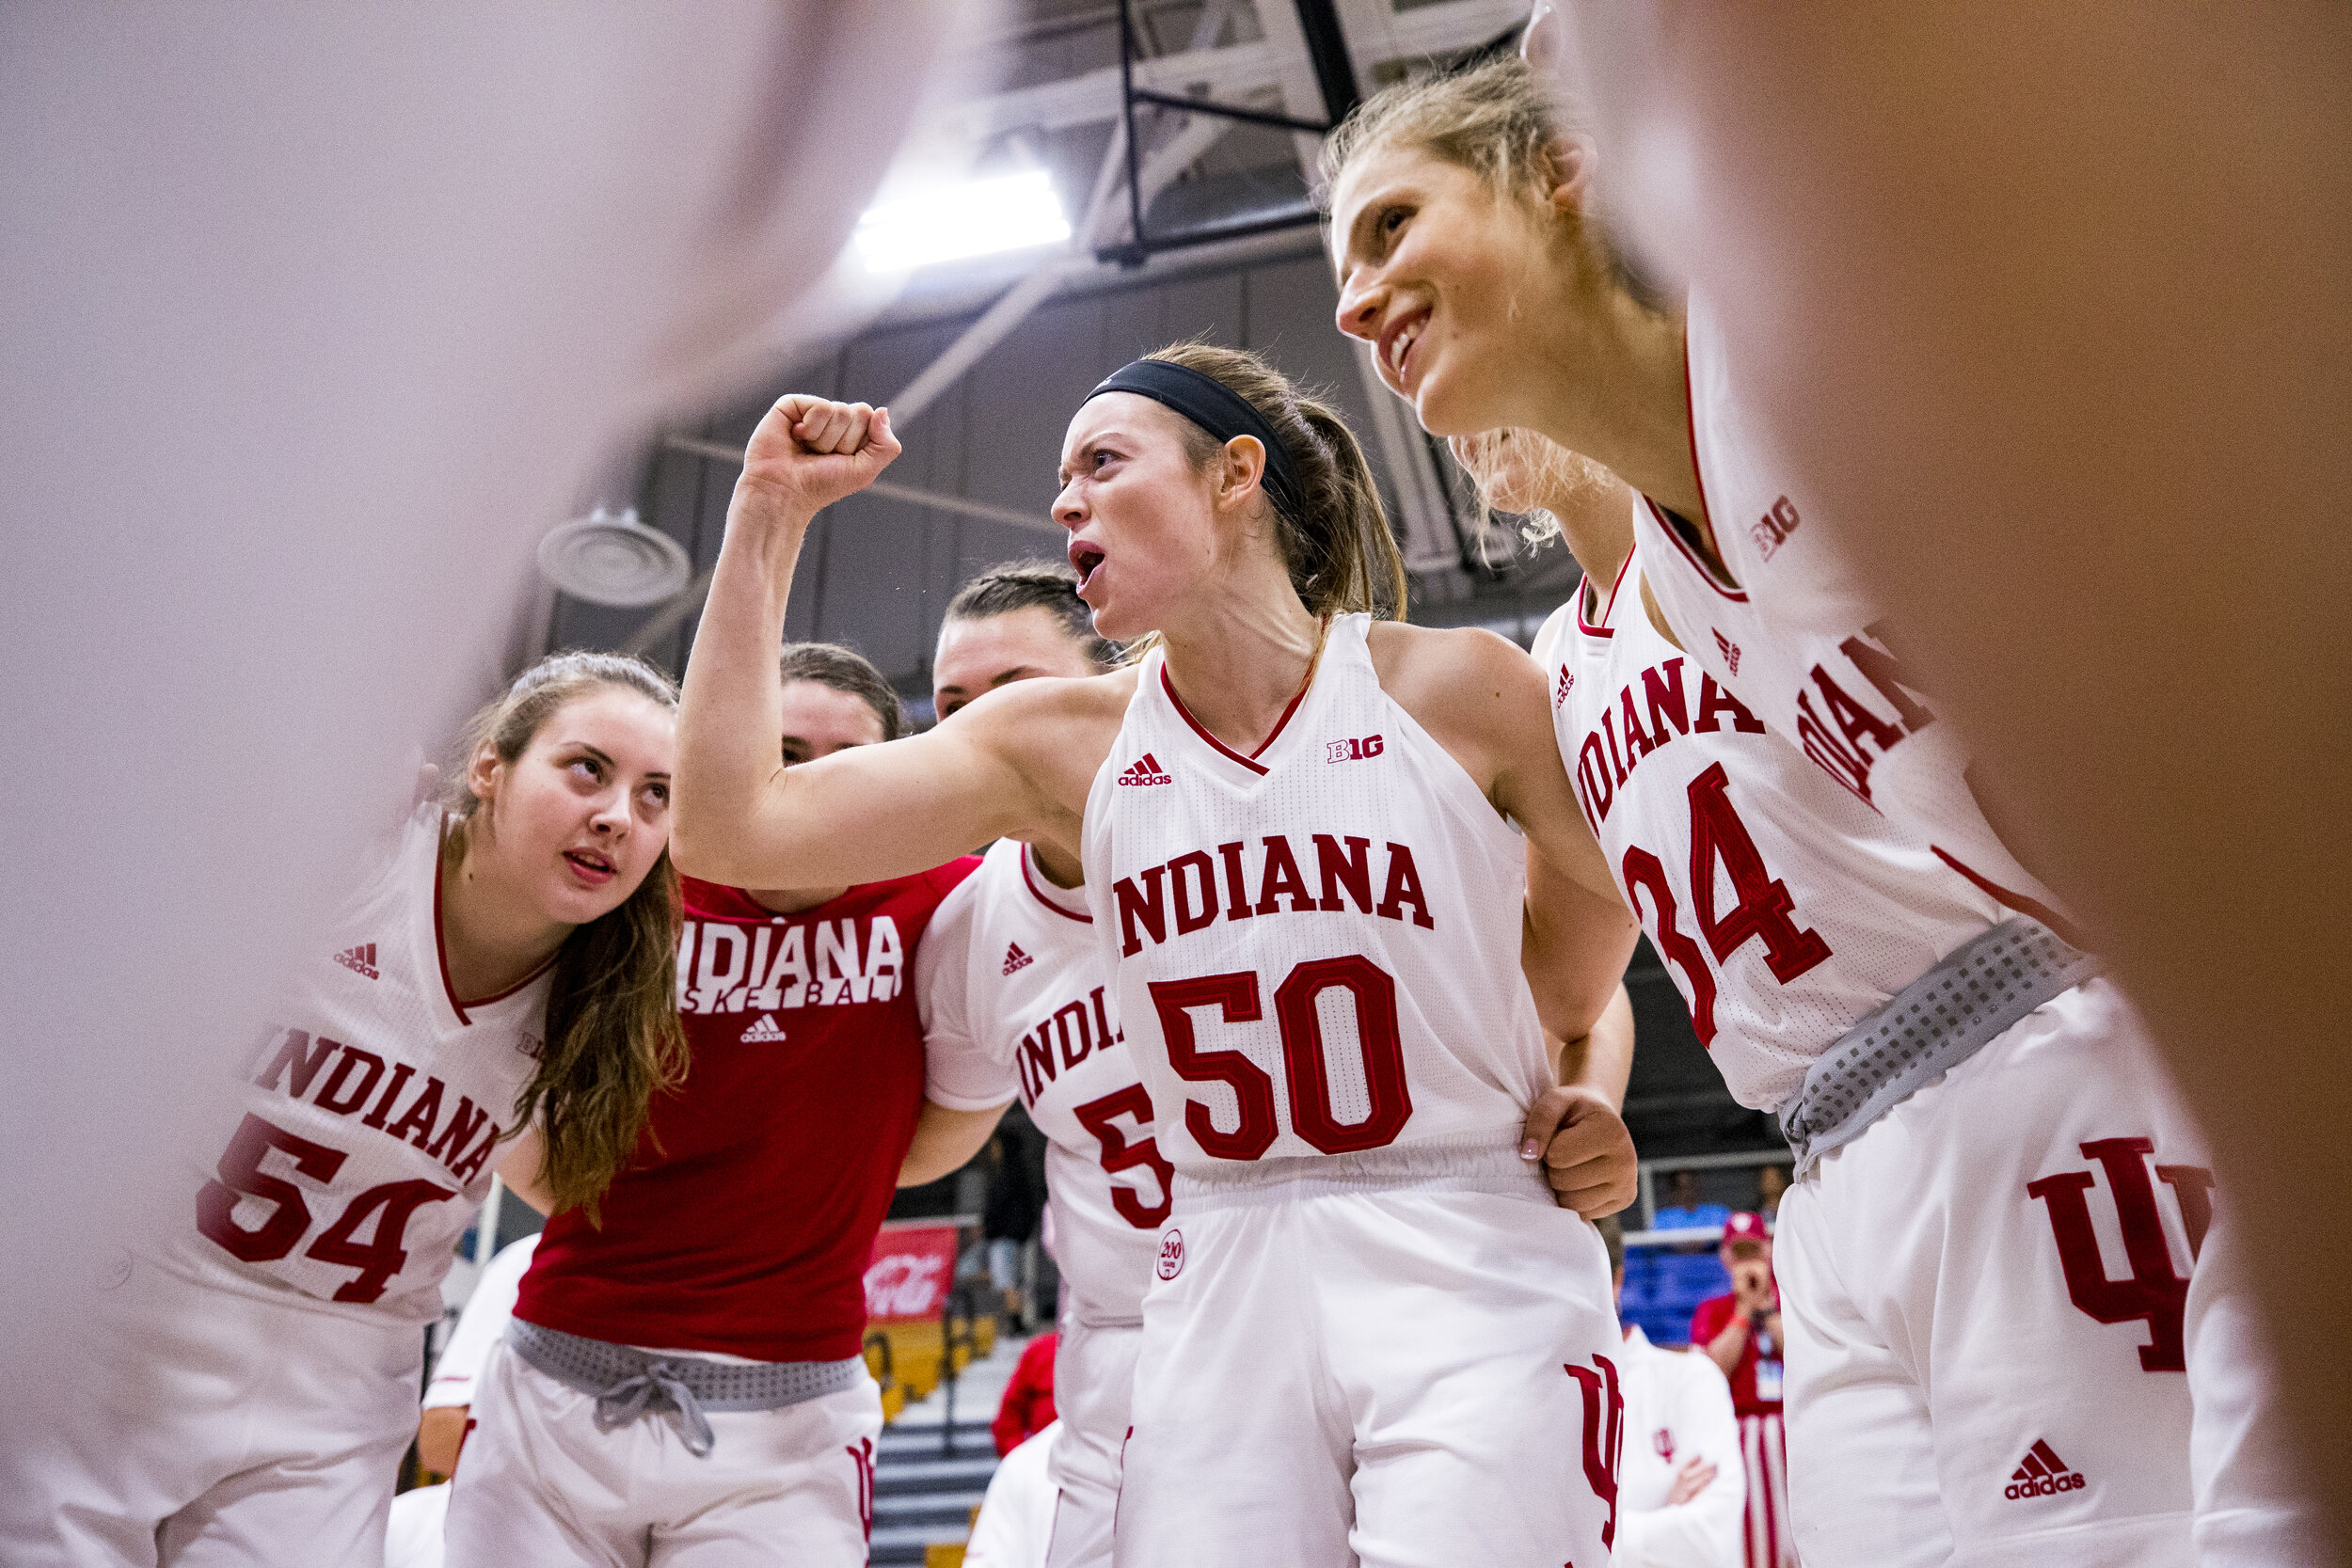  CHARRLOTTE AMALIE WEST, U.S. VIRGIN ISLANDS - NOVEMBER 29, 2019 - forward Brenna Wise #50 of the Indiana Hoosiers during the game against the Baylor Bears and the Indiana Hoosiers at the University of the Virgin Islands in St. Thomas, US Virgin Isla